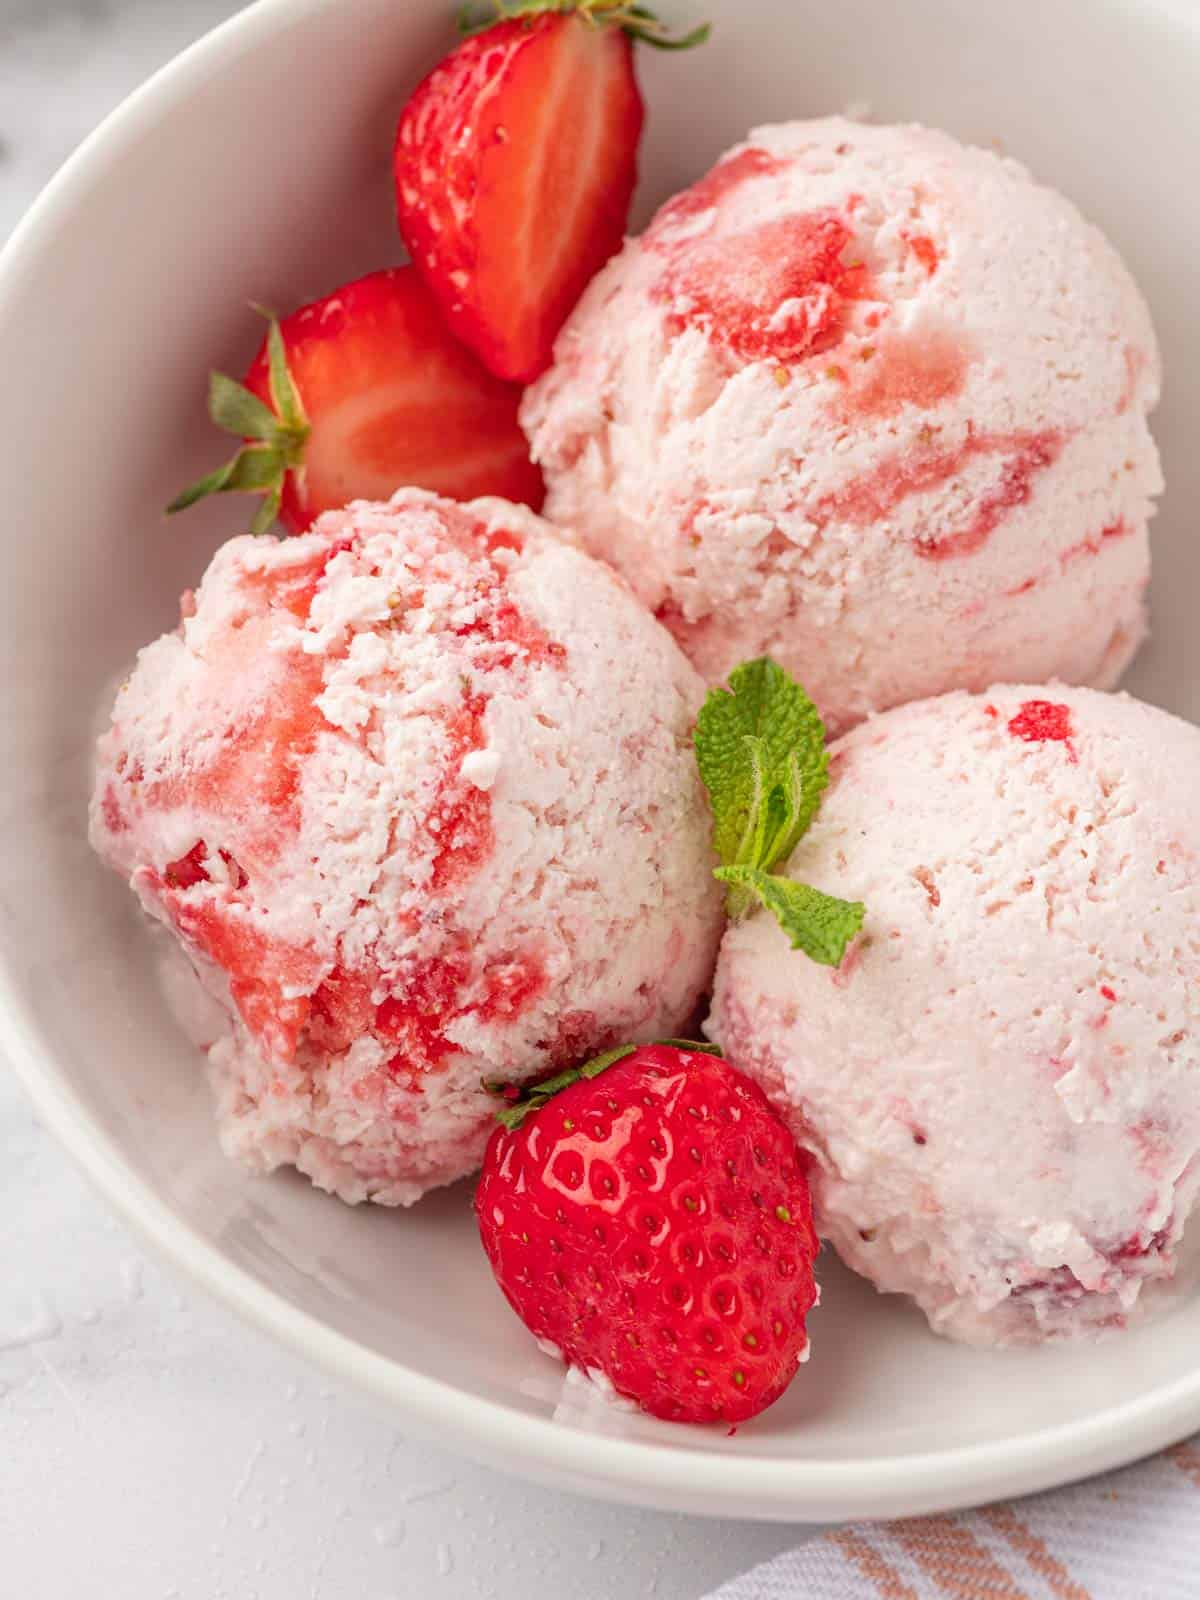 Scoops of strawberry ice cream in a bowl.